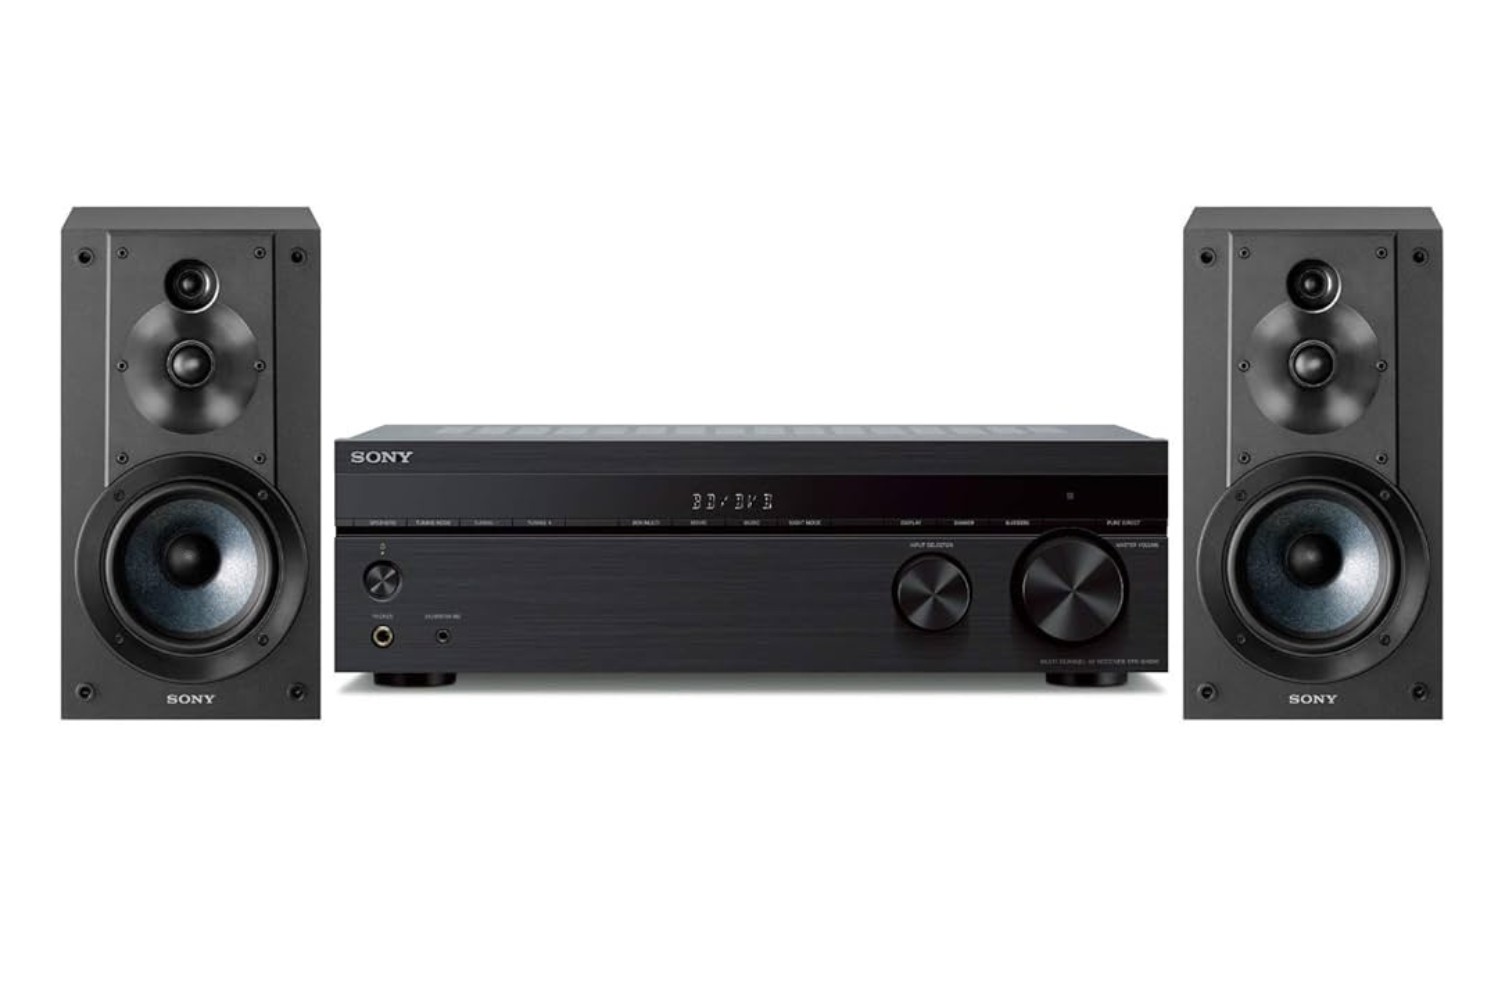 How To Turn On Subwoofer On Sony Multi-Channel AV Receiver